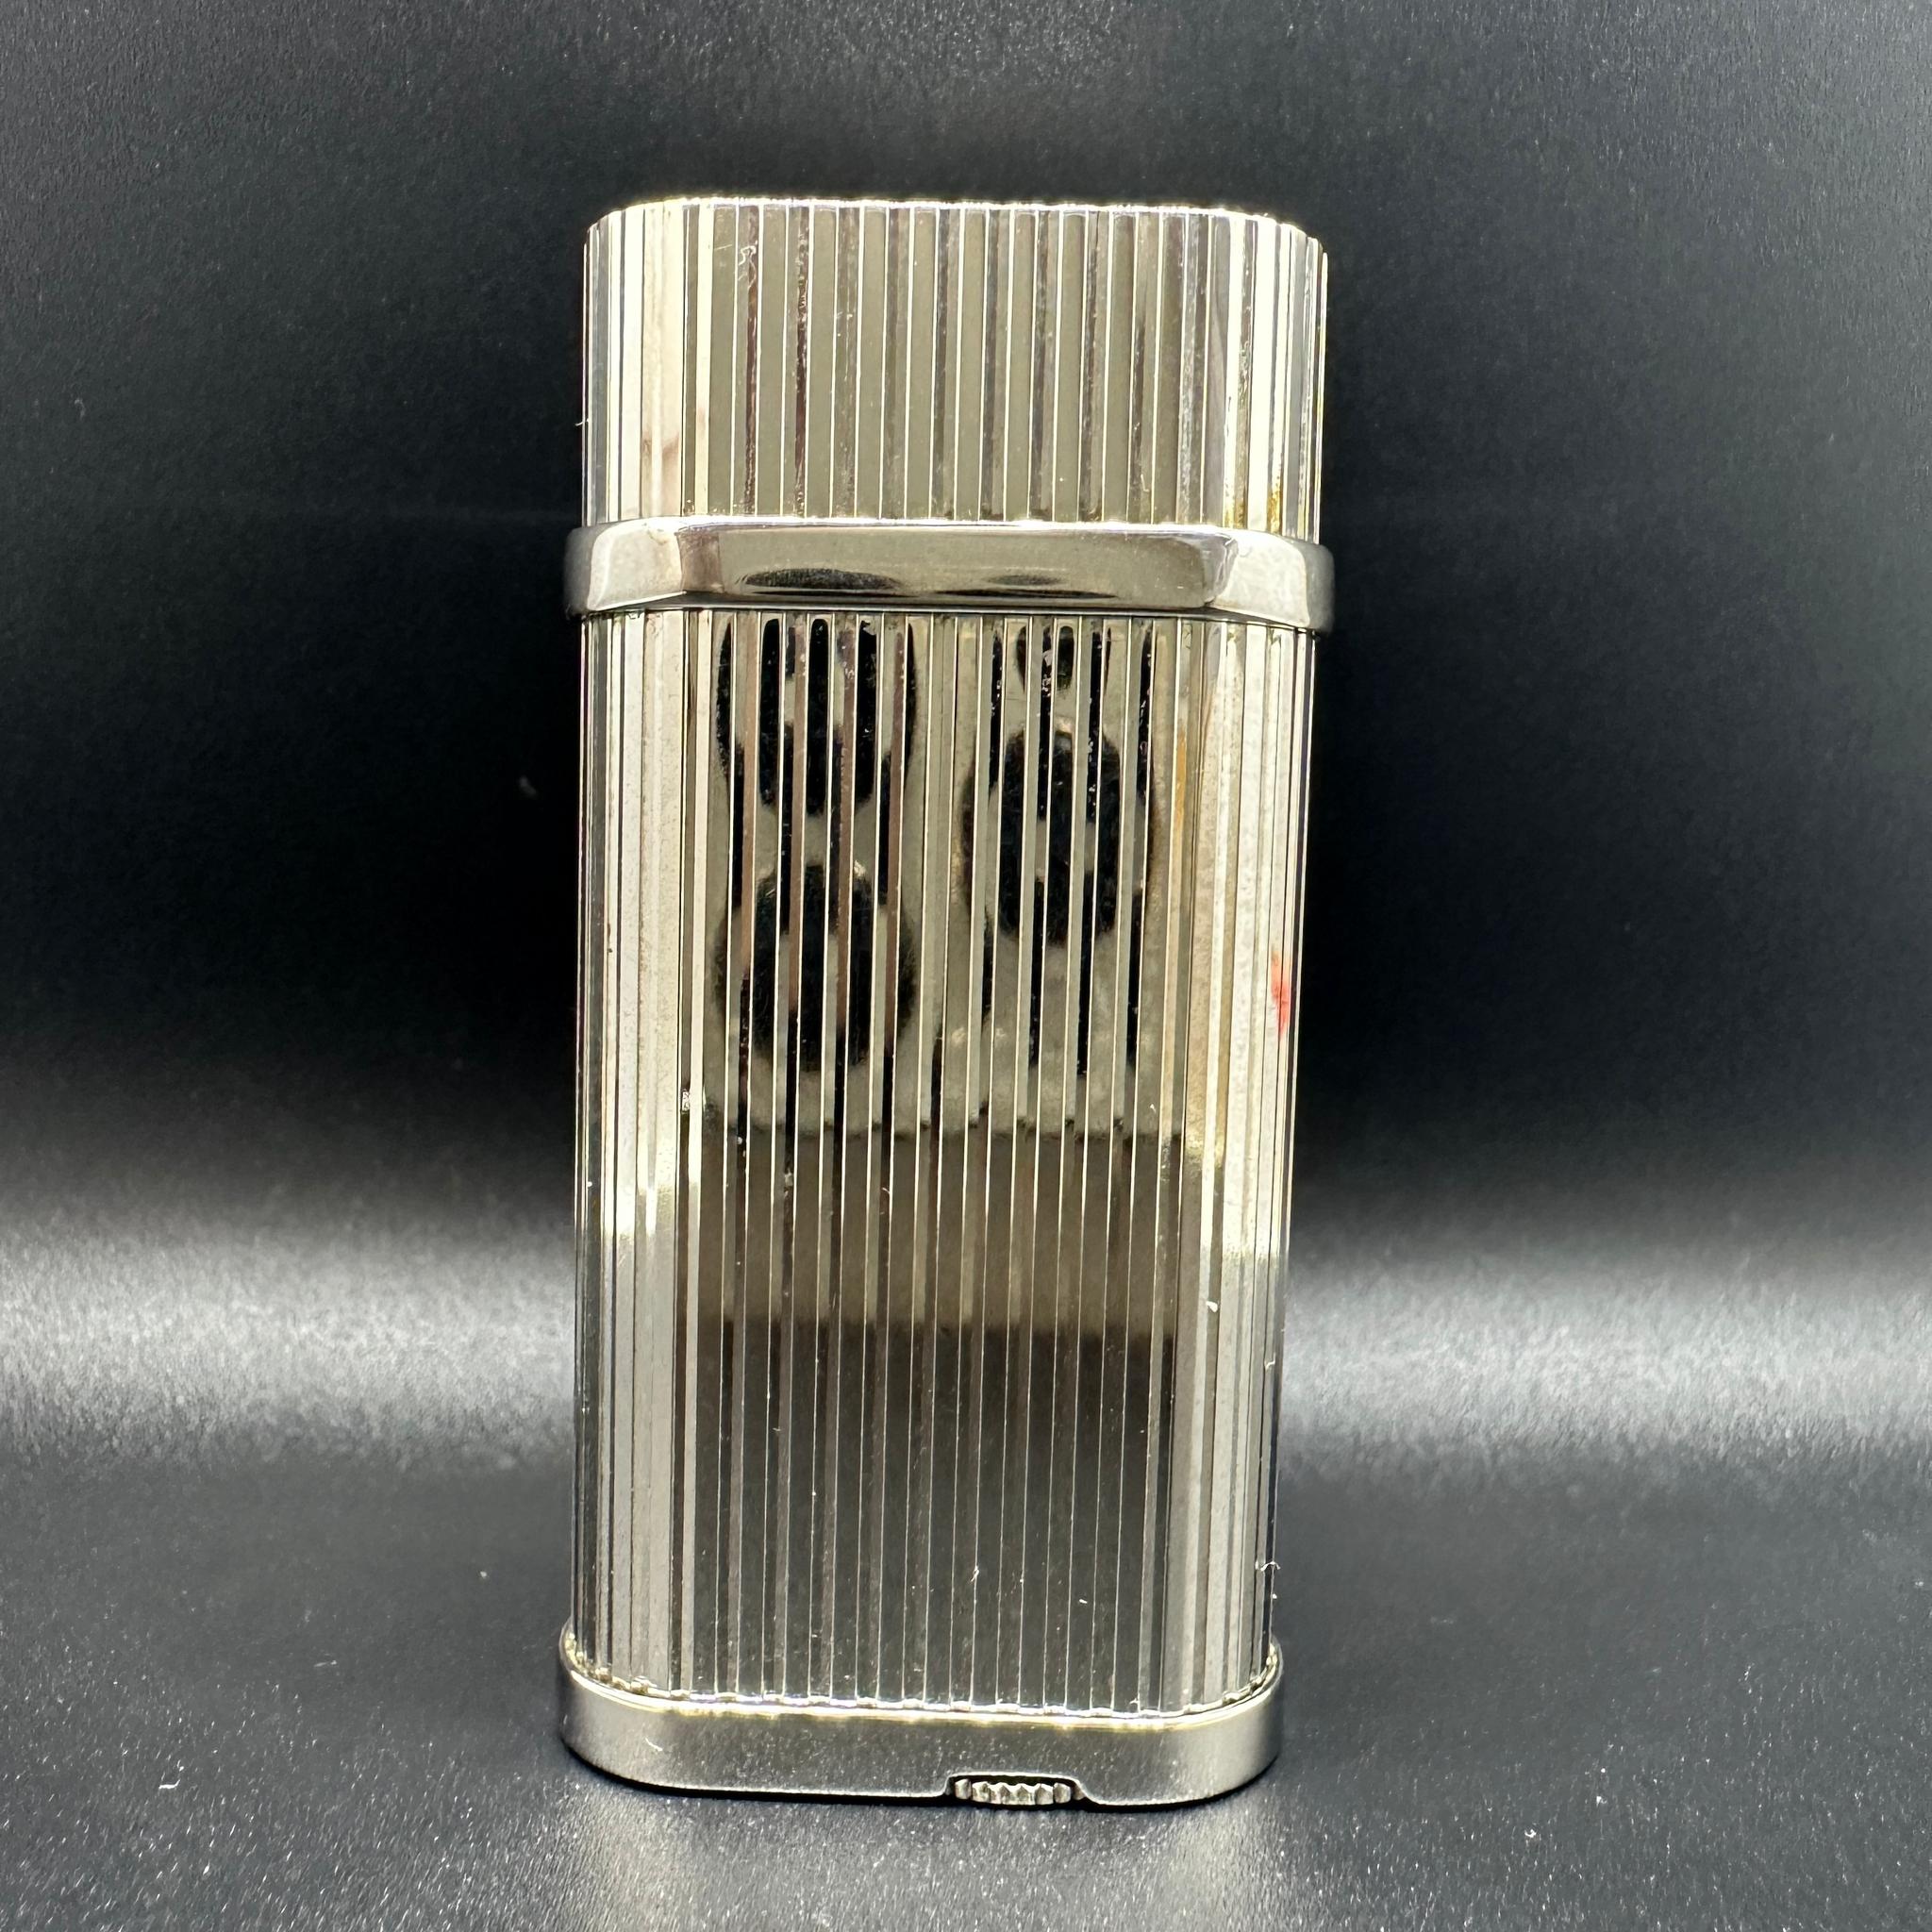 Cartier lighter 
Silver Cartier Gas Lighter Platinum finish
In Mint condition
Comes in original Cartier box 
With original Cartier papers 
The lighter is compact and beautiful and works perfectly. 
Collectable
